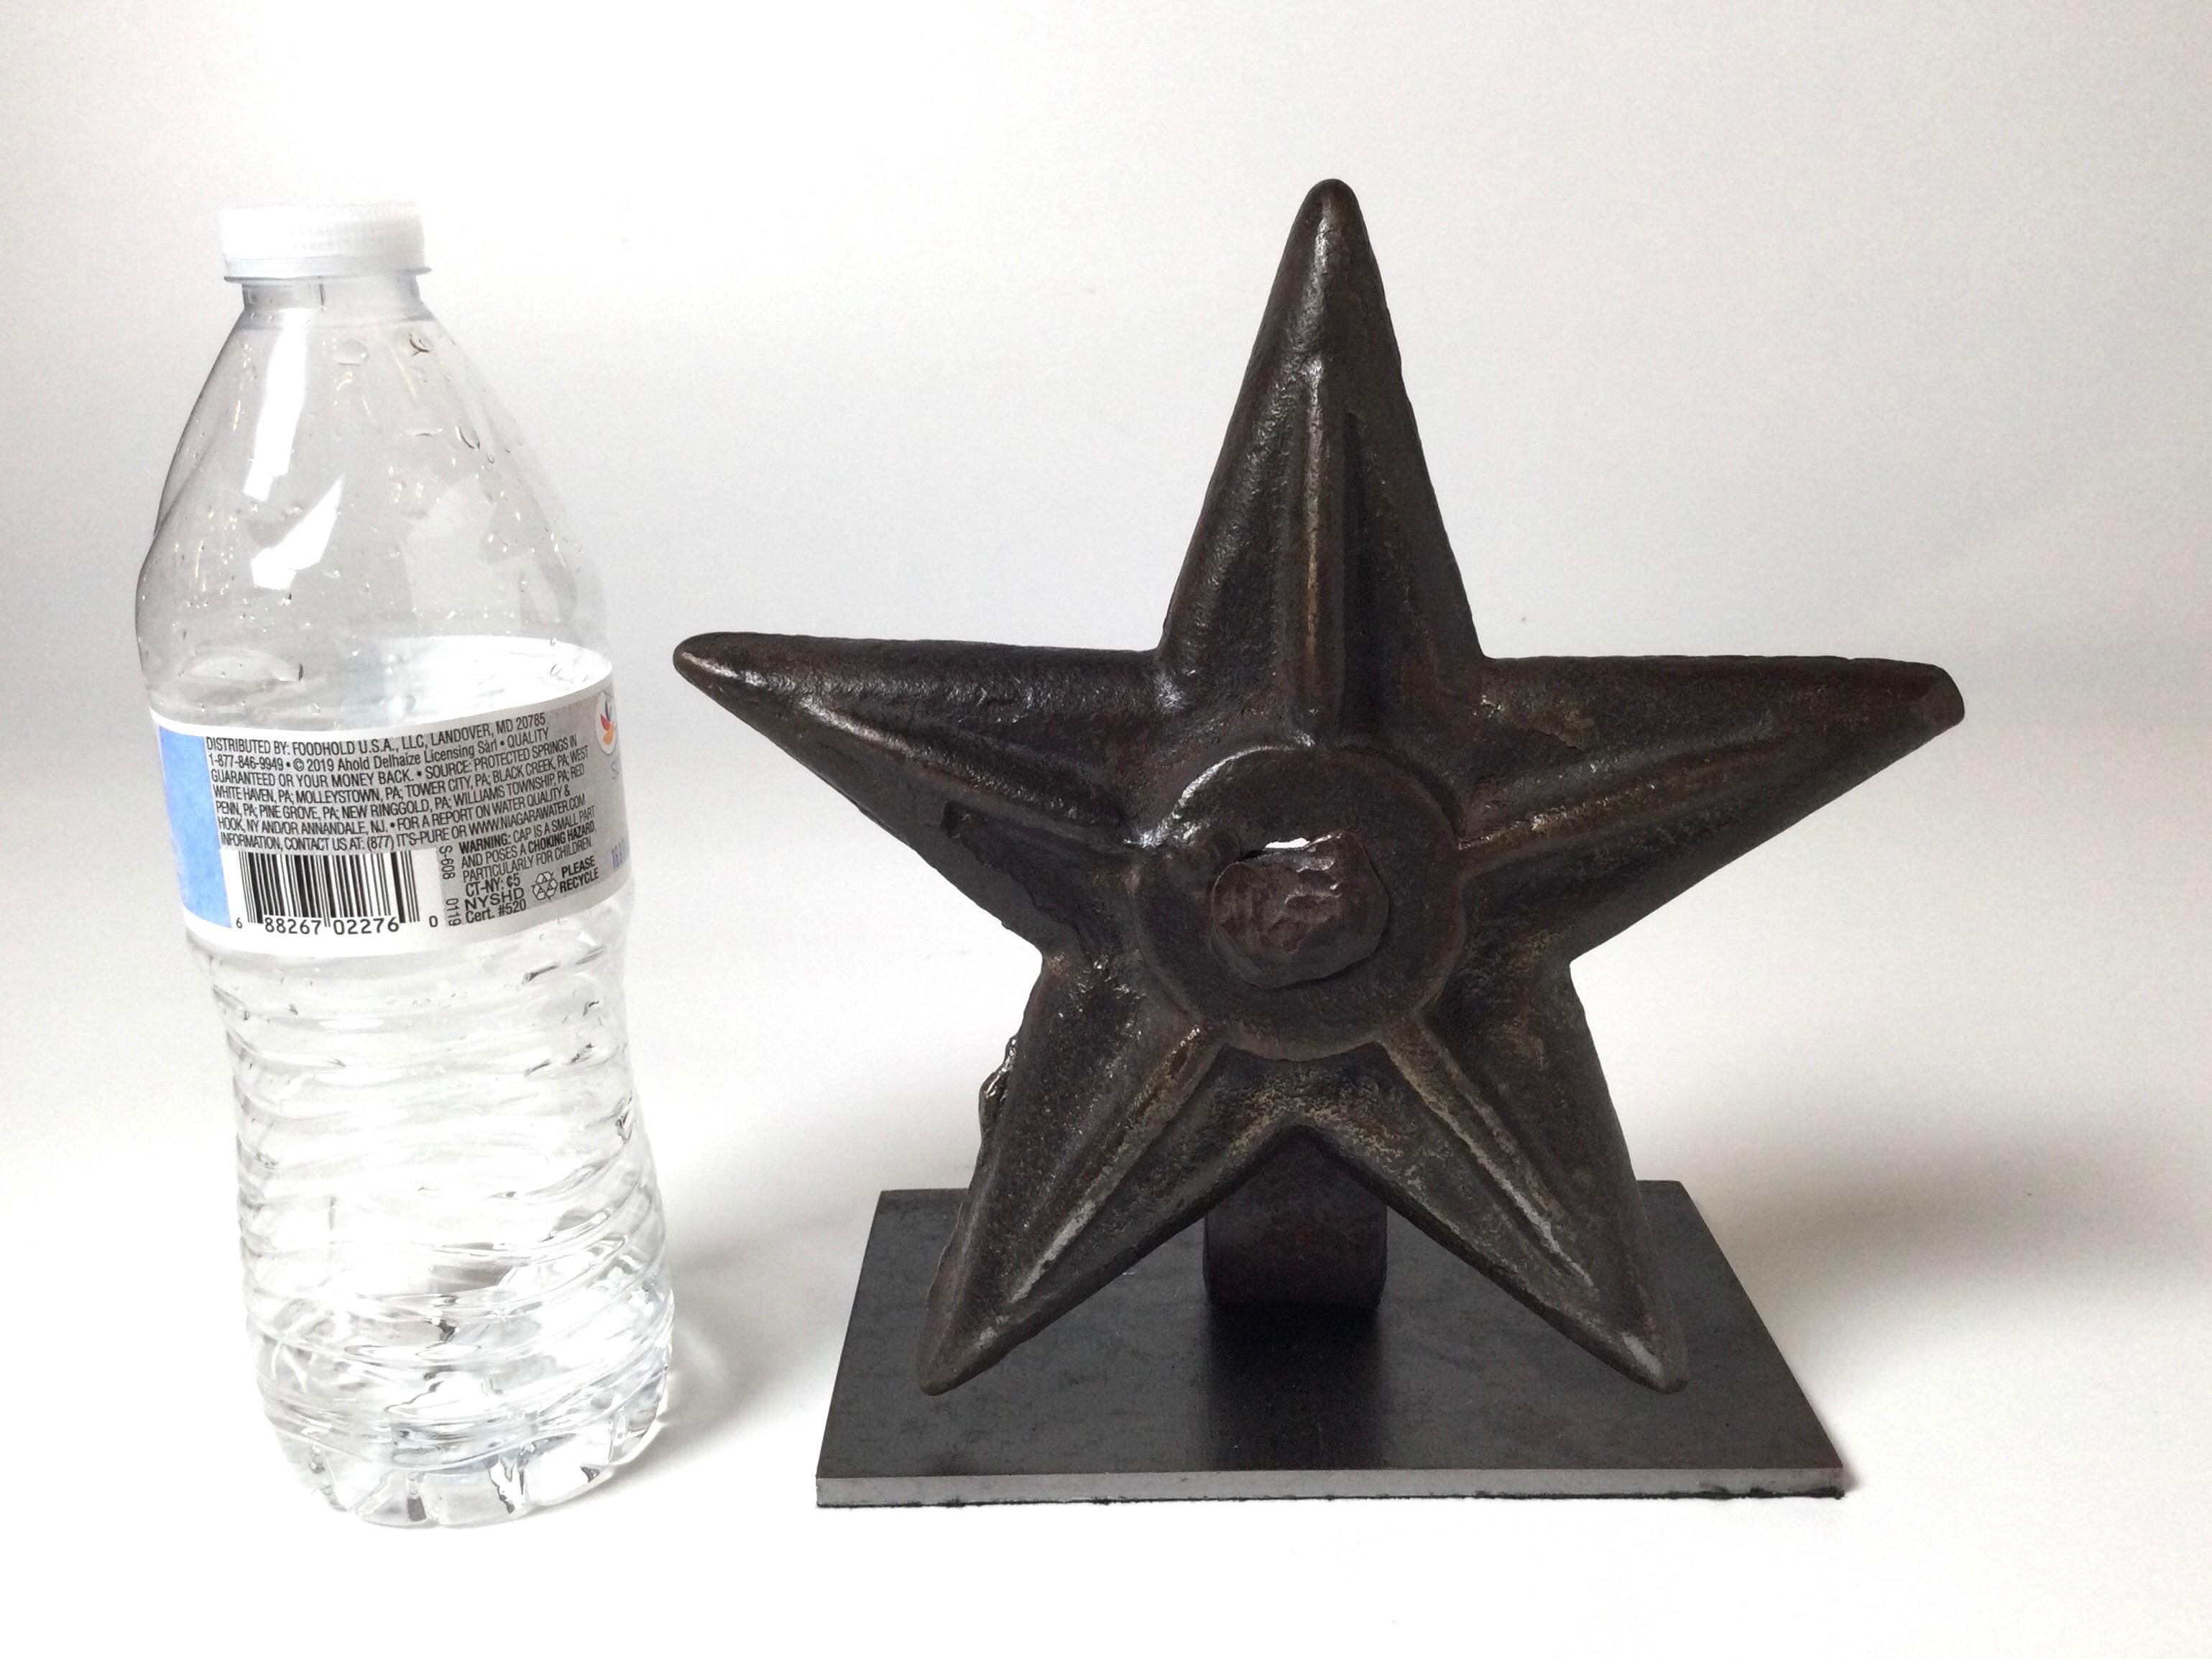 An iron architectural building star anchor mounted on a steel base. The 19th Century star is originally part of a brick building and used to anchor in to secure the brickwork to the interior beams. This has been mounted to a professionally made